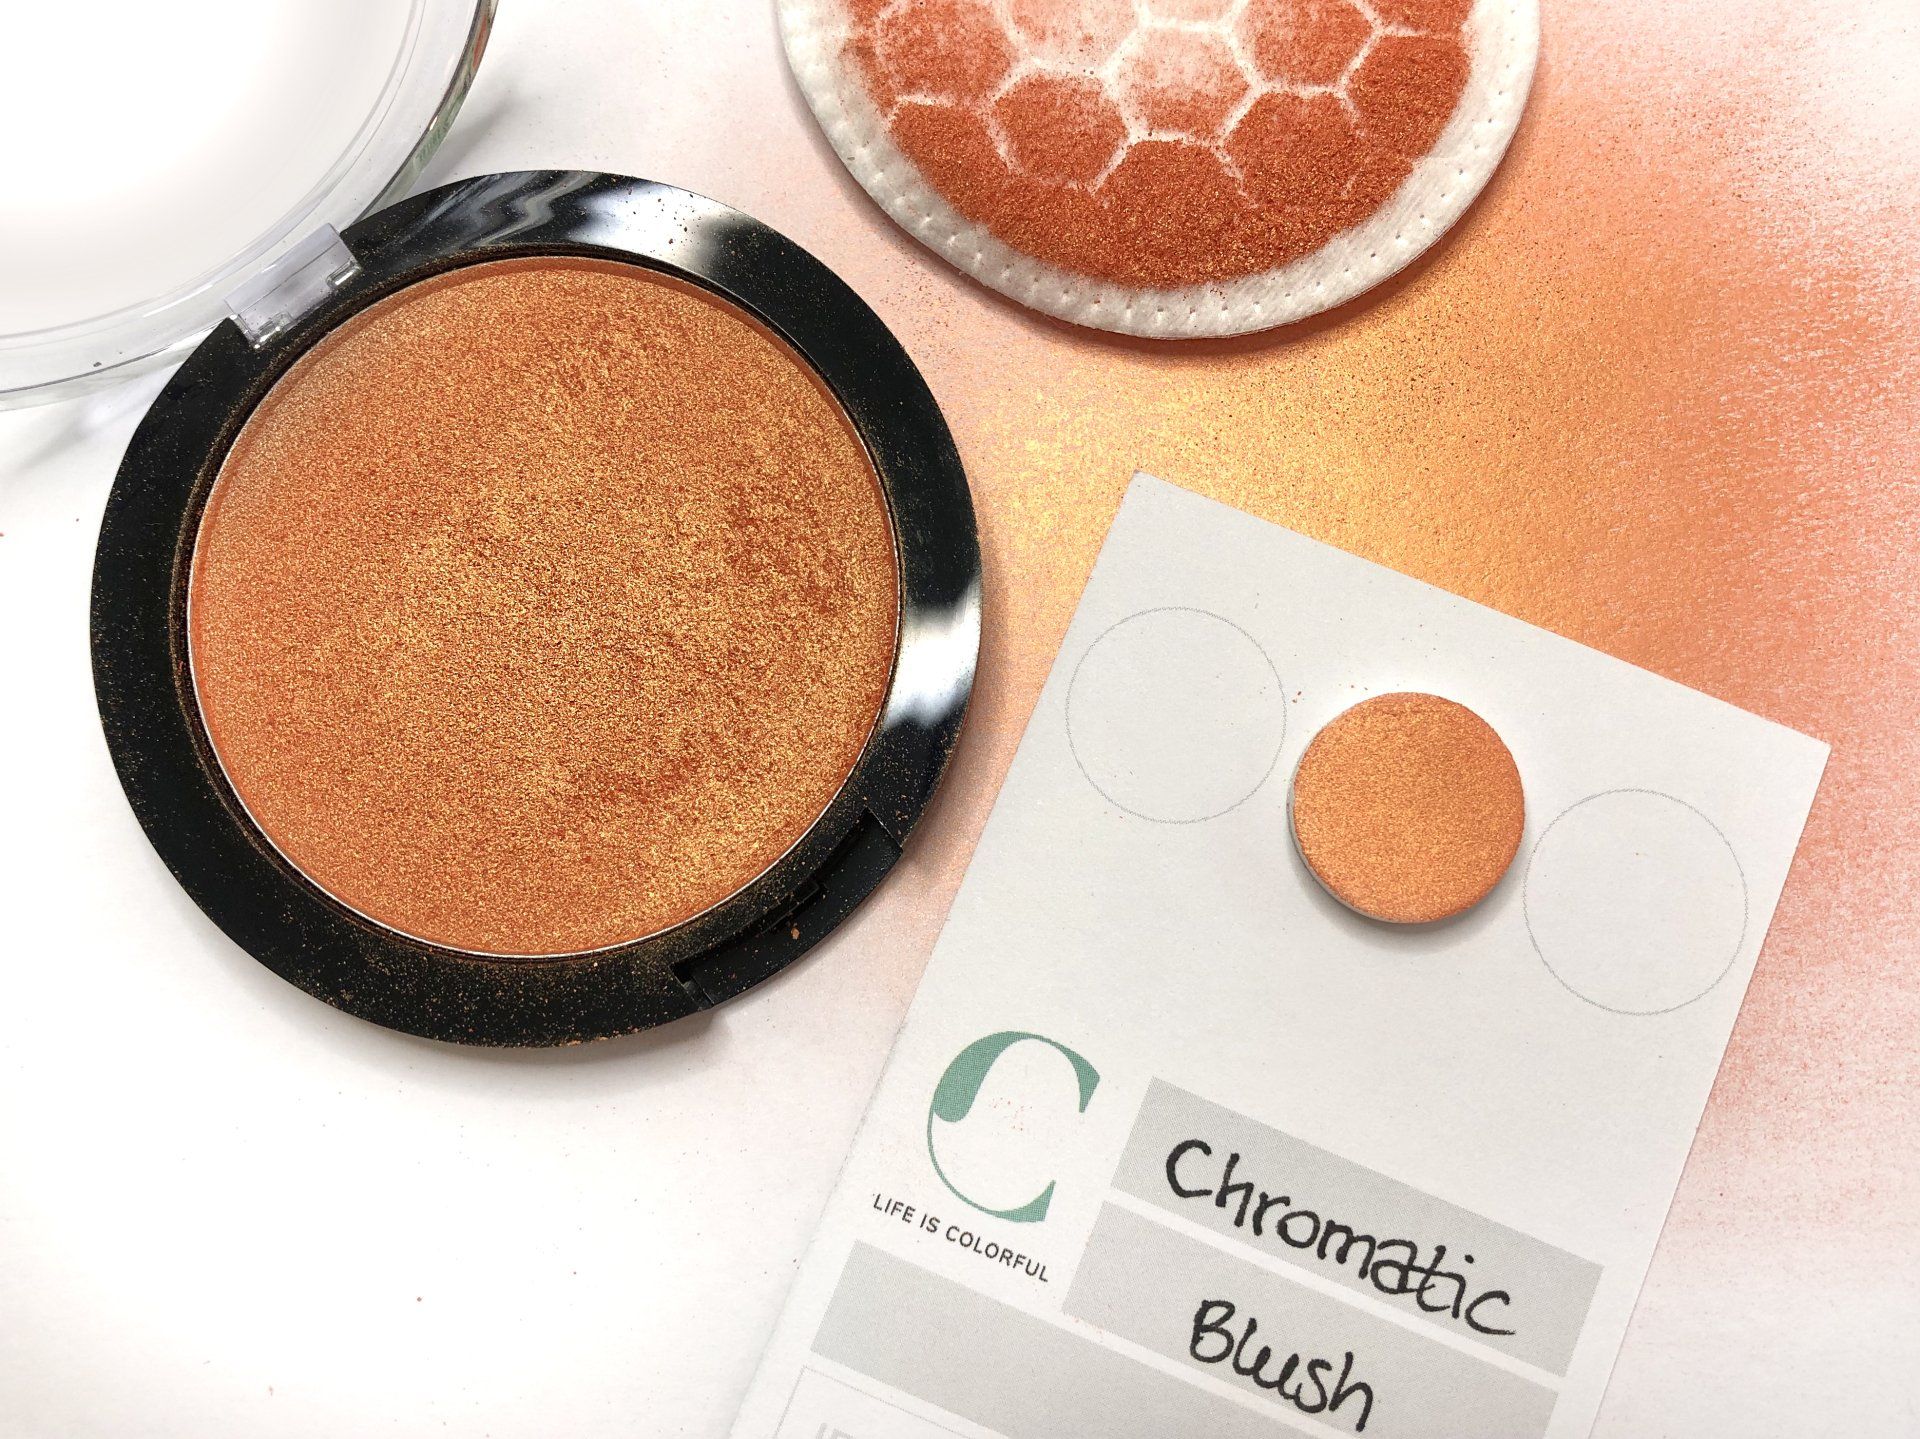 Chromatic blush applied on different surfaces to see the color changes depending on the angle.